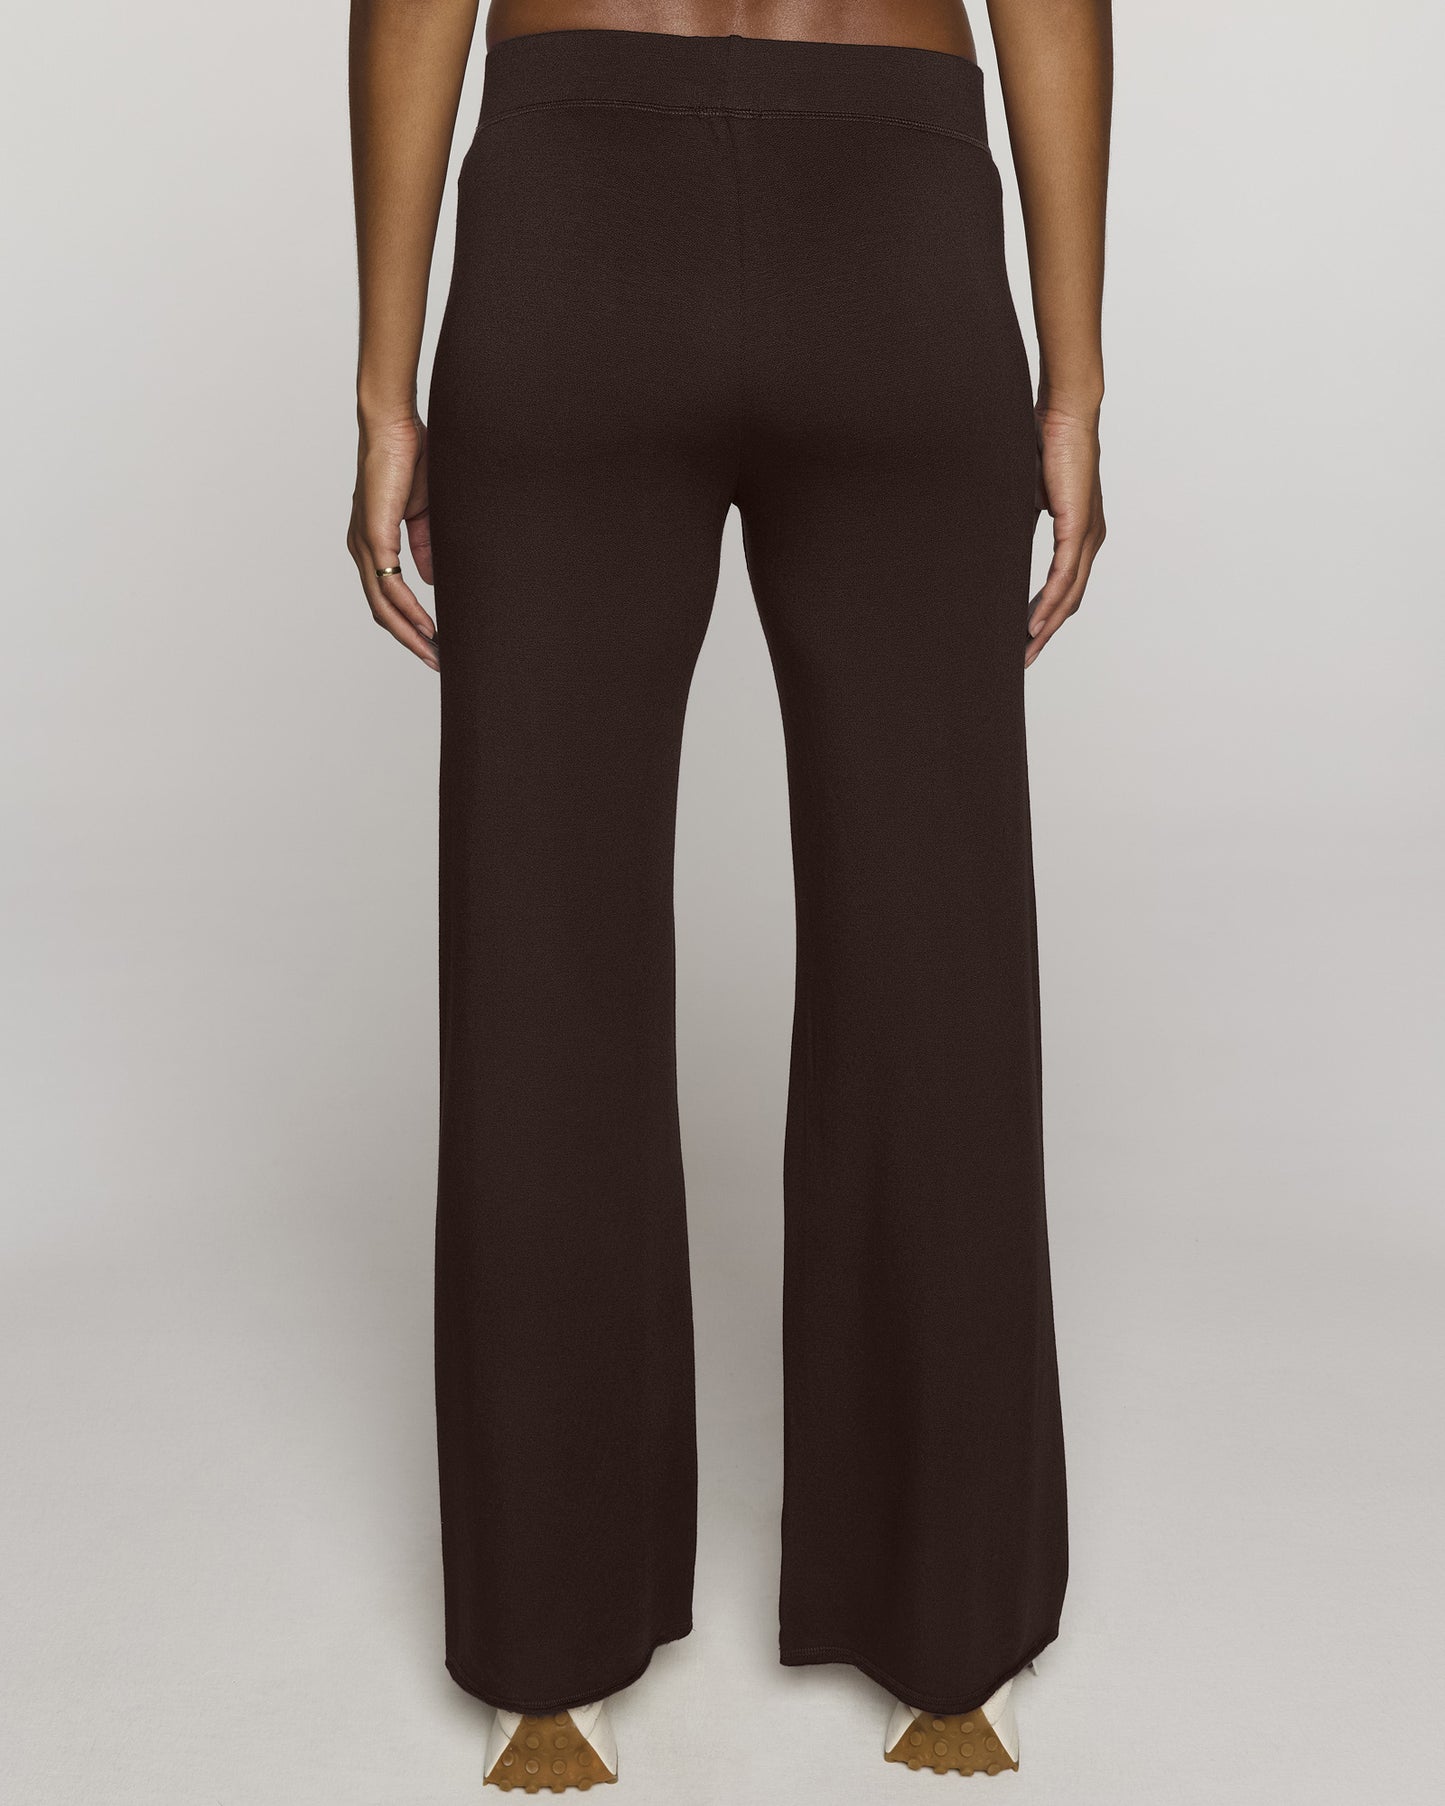 Coco | The Cindy Pant Back